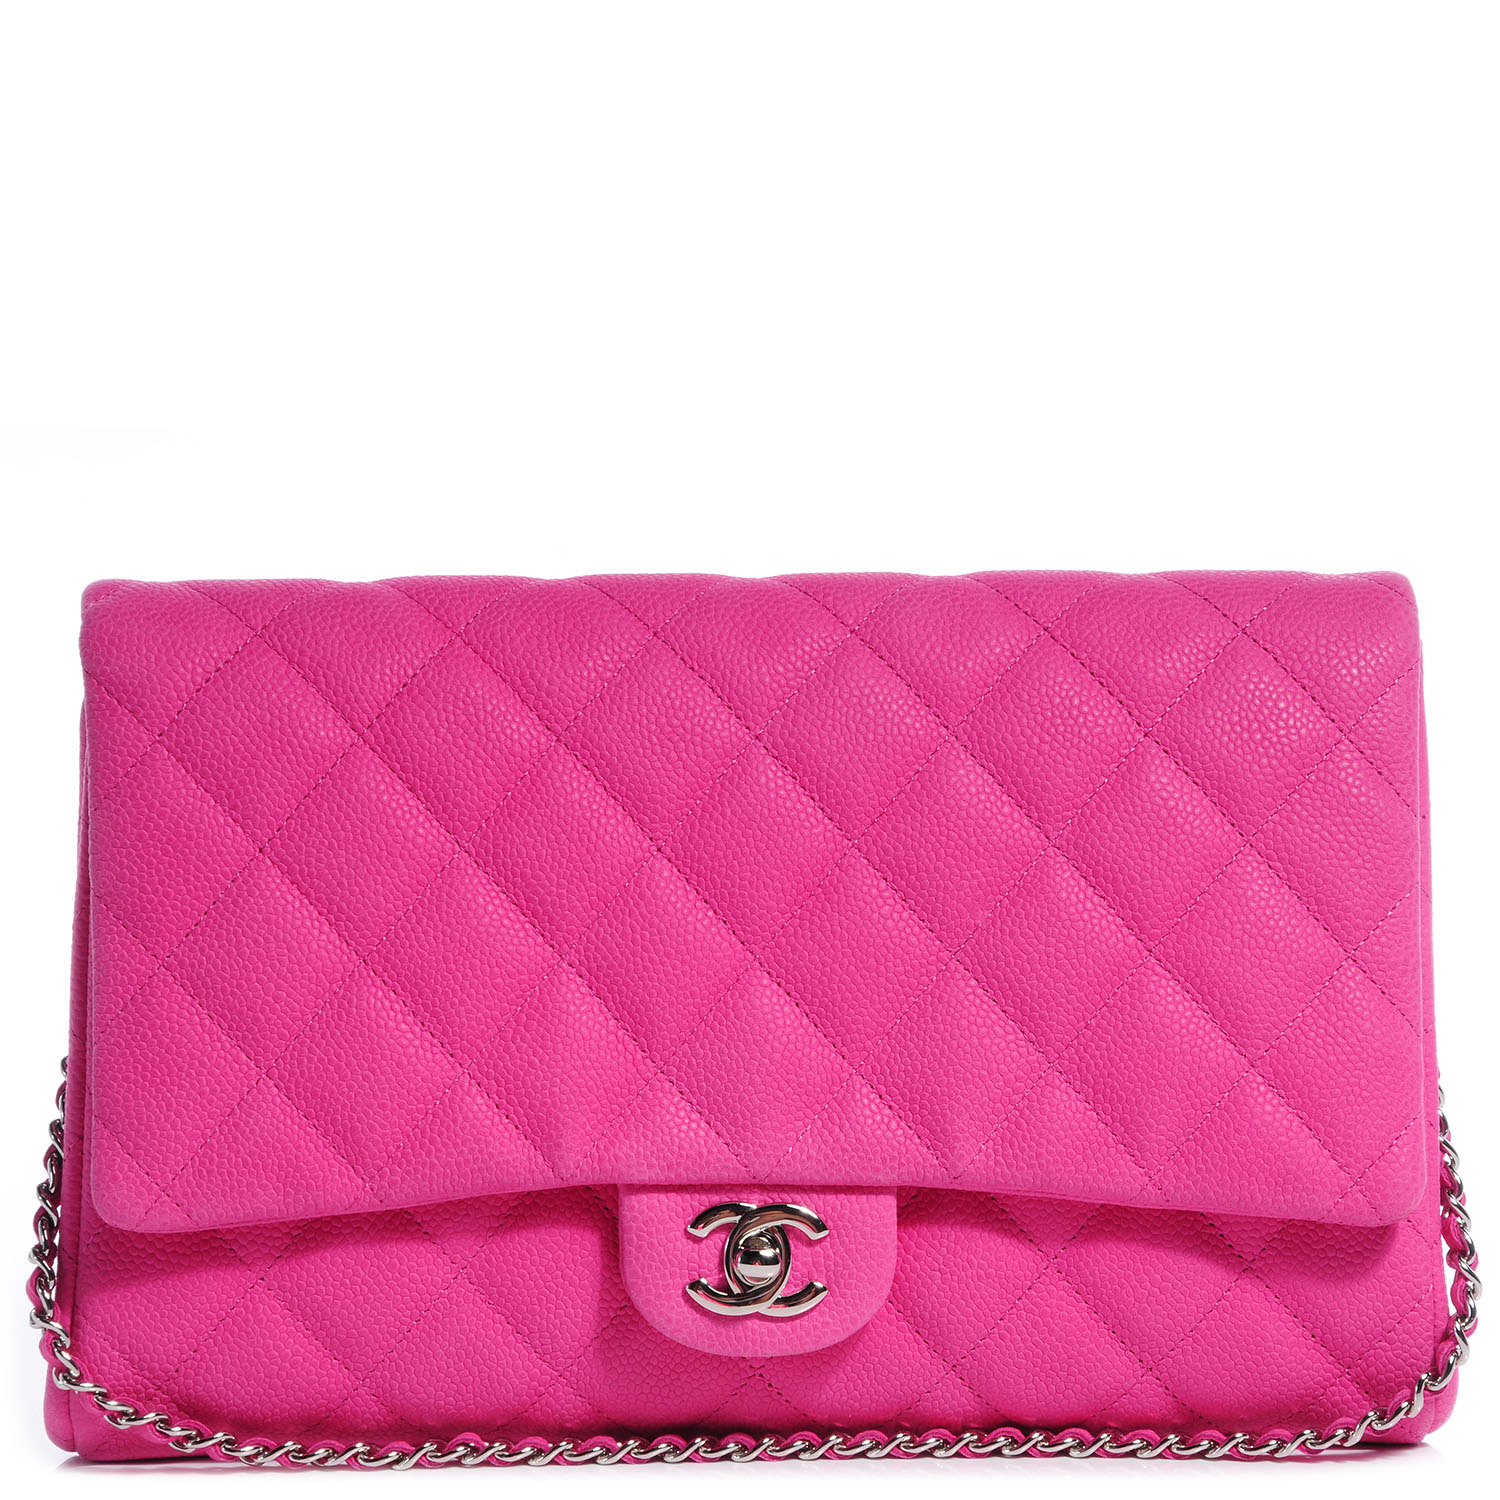 CHANEL Iridescent Caviar Clutch with Chain Flap Hot Pink 65298